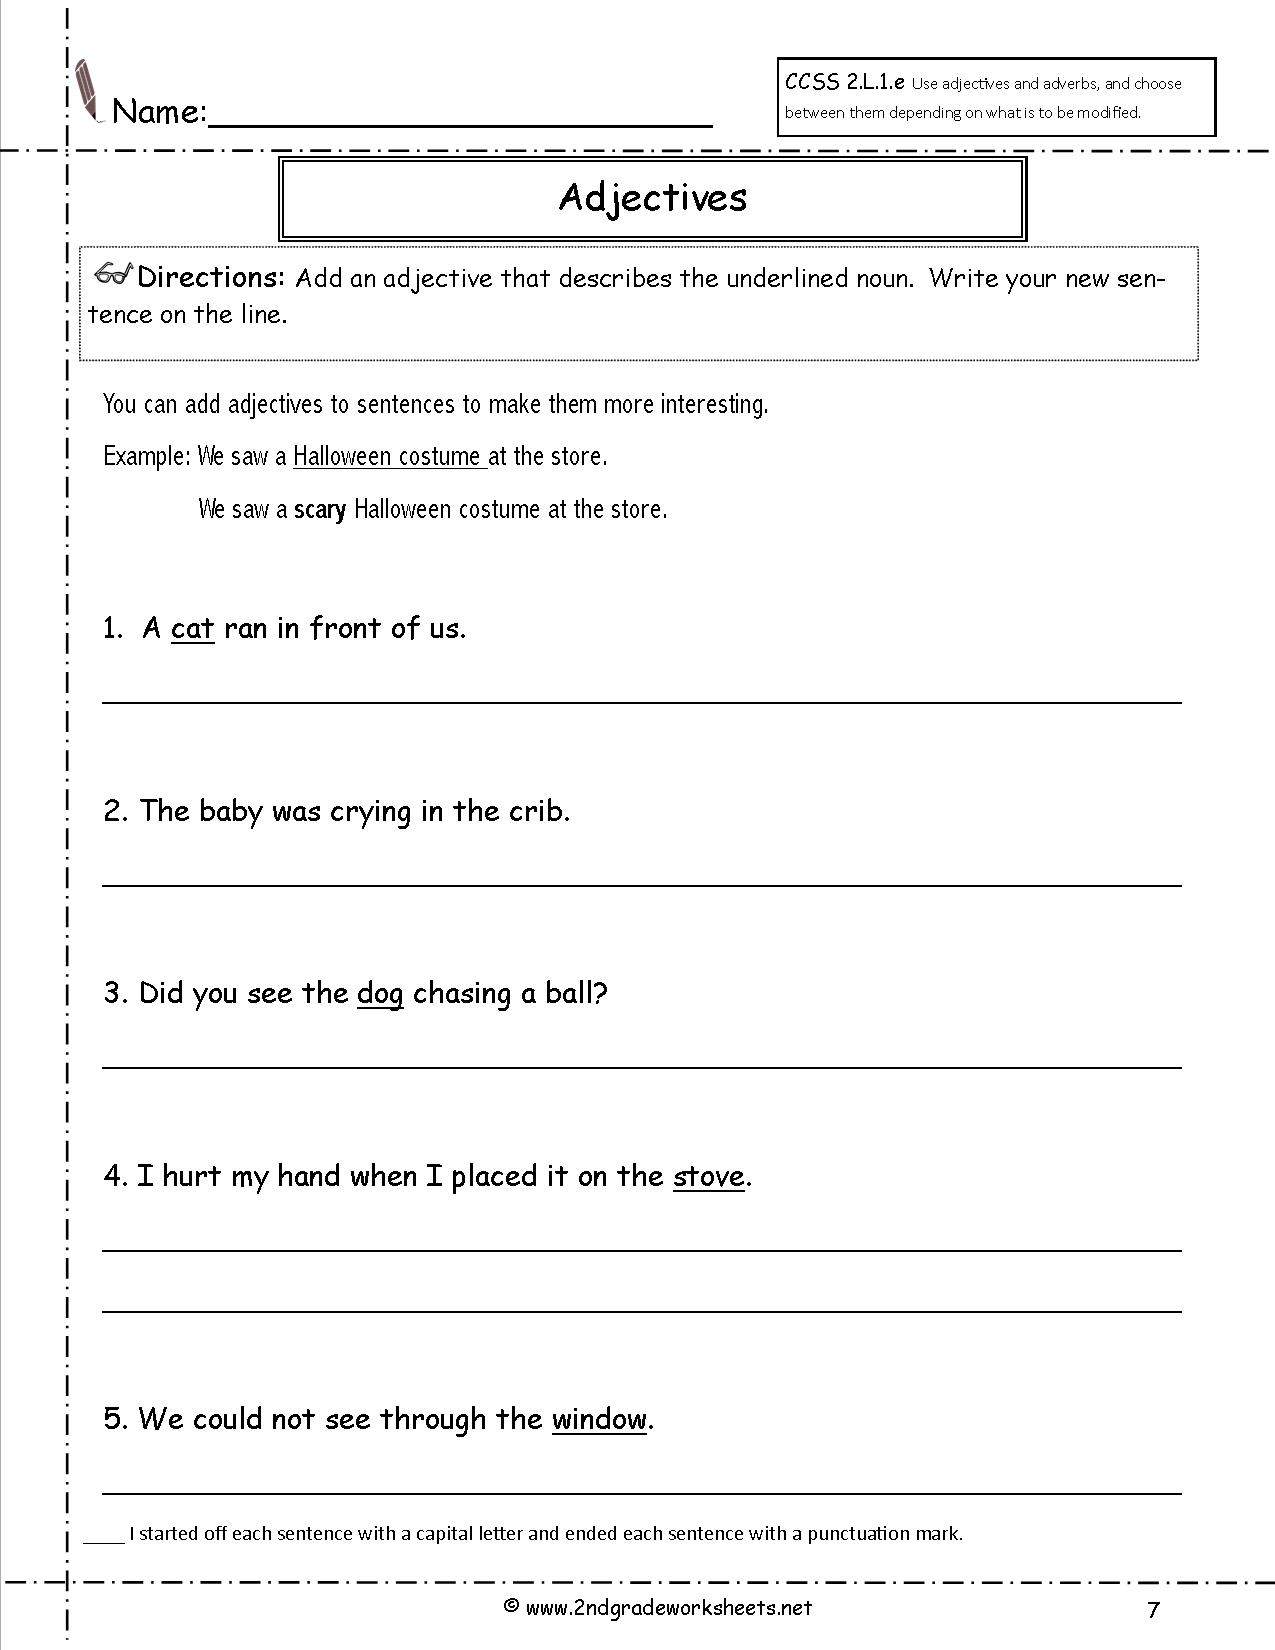 compound-adjectives-interactive-worksheet-adjectives-nouns-and-adjectives-adjectives-verbs